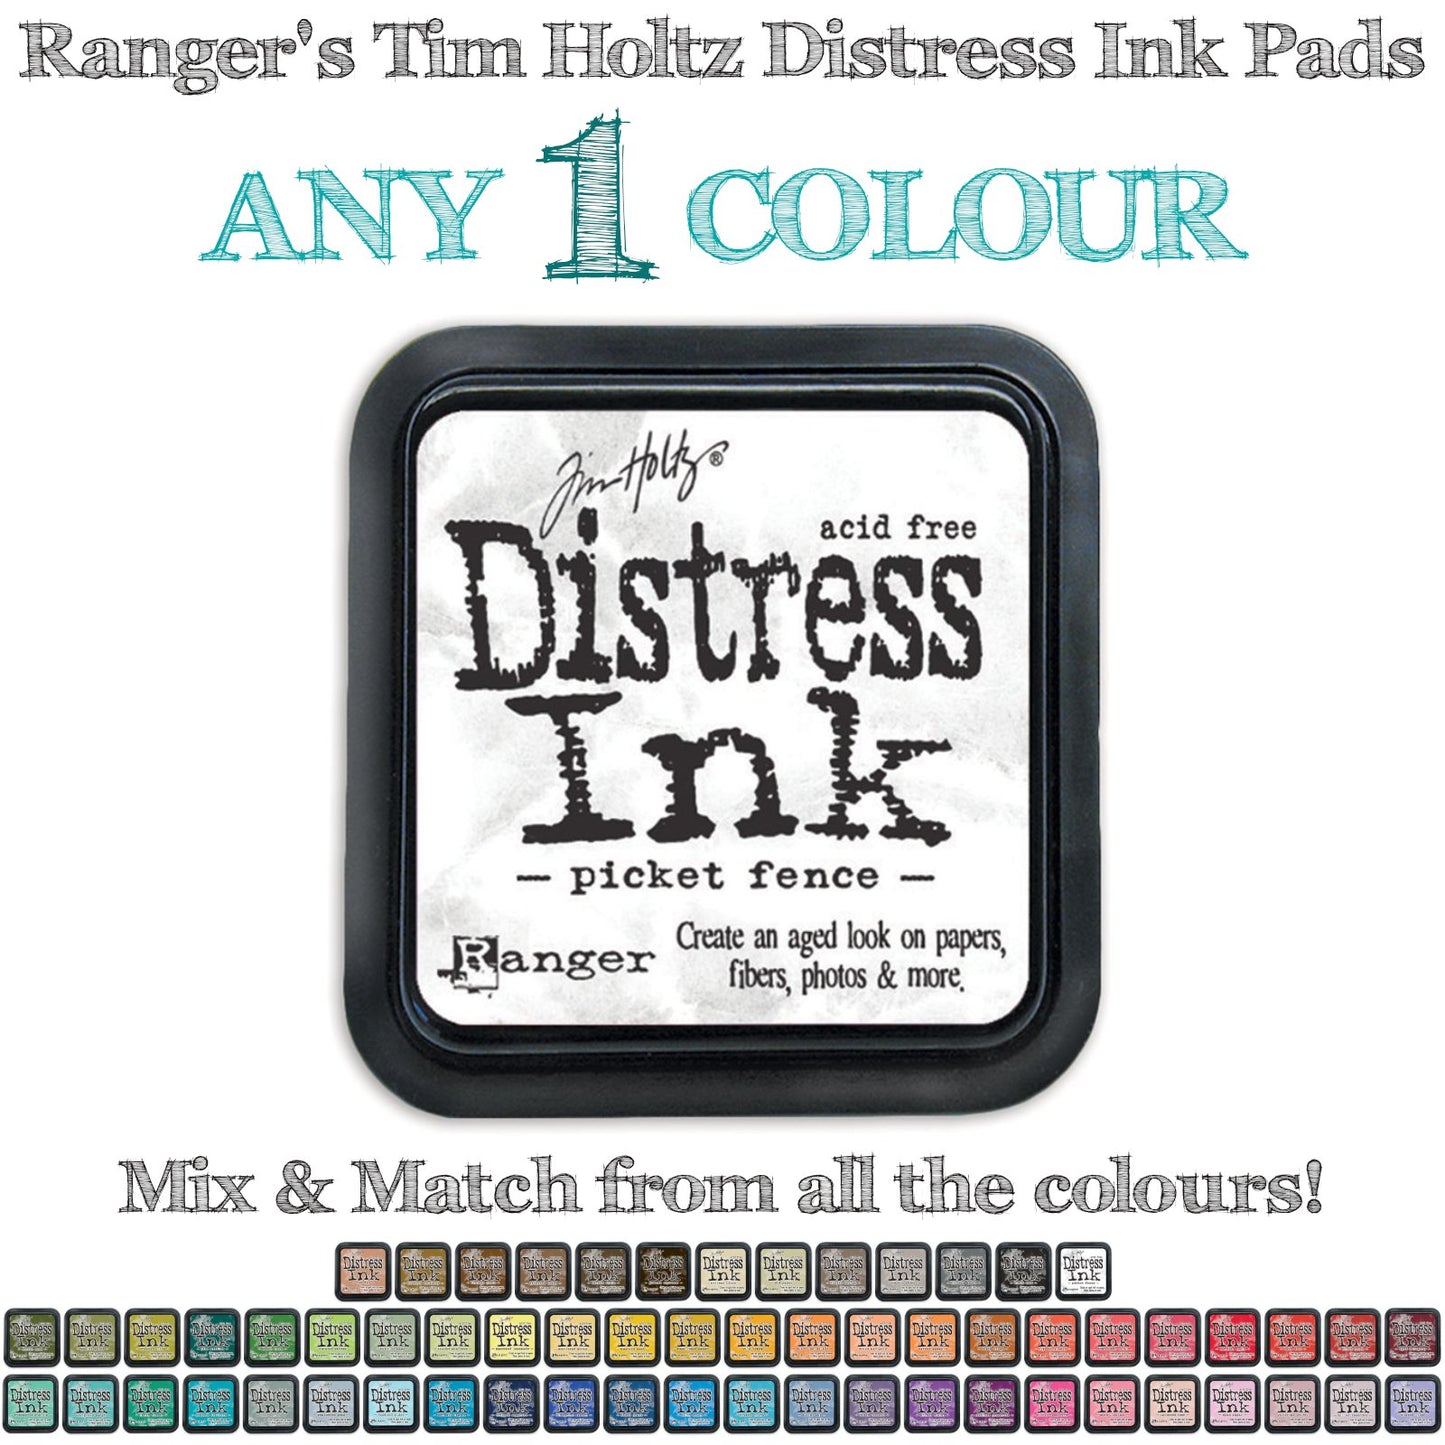 Distress Ink Pad - by Tim Holtz, Ranger ... Choose any 1 colour from all the beautiful colours in Ranger's Tim Holtz® Distress Ink range (3"x3" sized stamp pad).  Distress Ink Pads by Tim Holtz and Ranger are a water-soluble dye based inks (the white, Picket Fence, is a pigment based) that are great for stamping, staining, colouring, painting, distressing, bookmaking, journaling, scrapbooking, mixed media and other papercrafts and visual arts. At Art by Jenny in Australia 